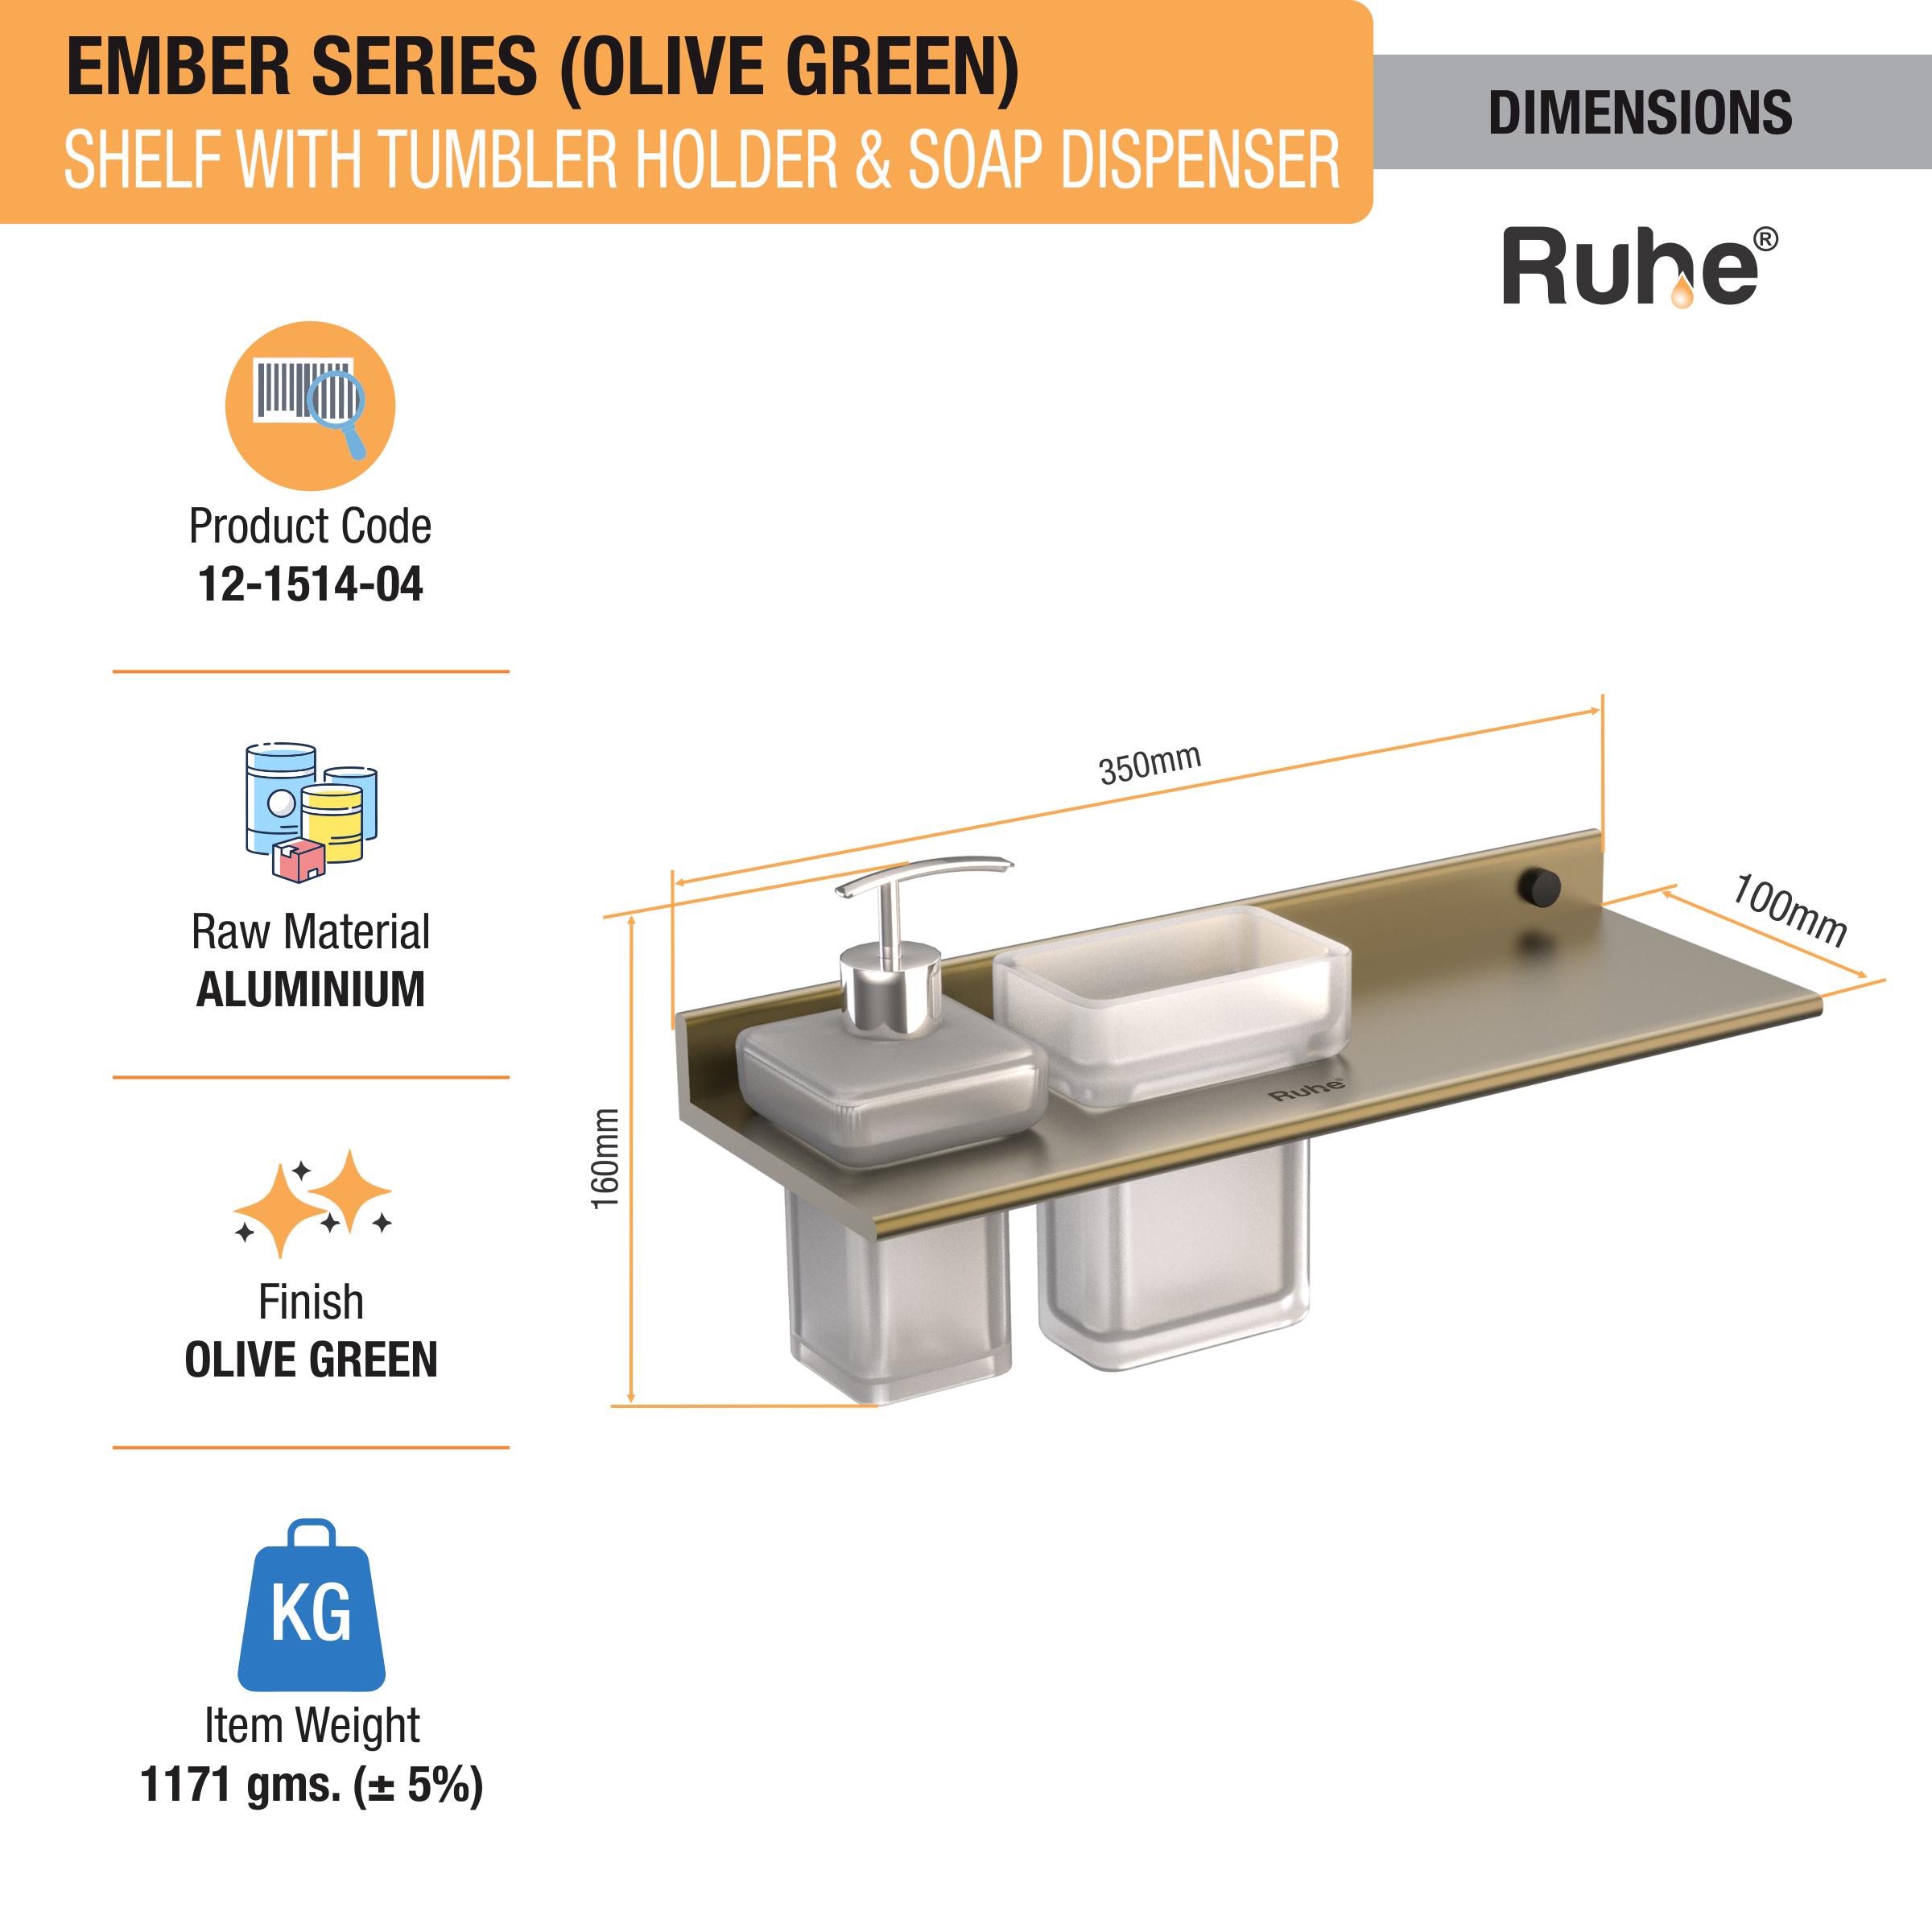 Ember Olive Green Shelf with Tumbler Holder & Soap Dispenser (Space Aluminium) dimensions and sizes